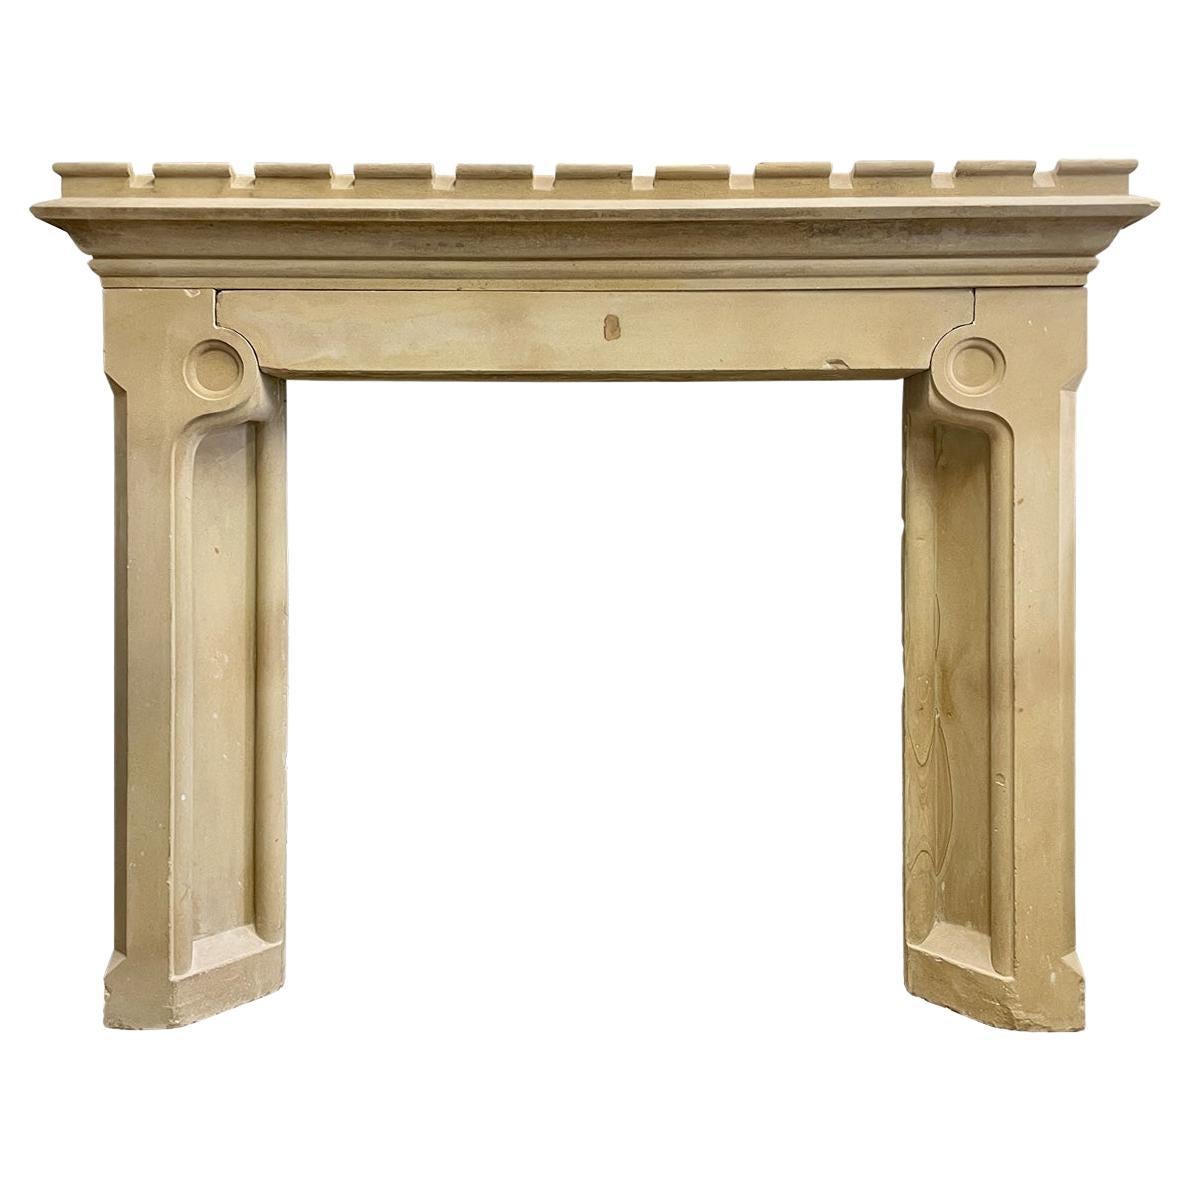 English 19th Century Stone Fireplace Mantel For Sale